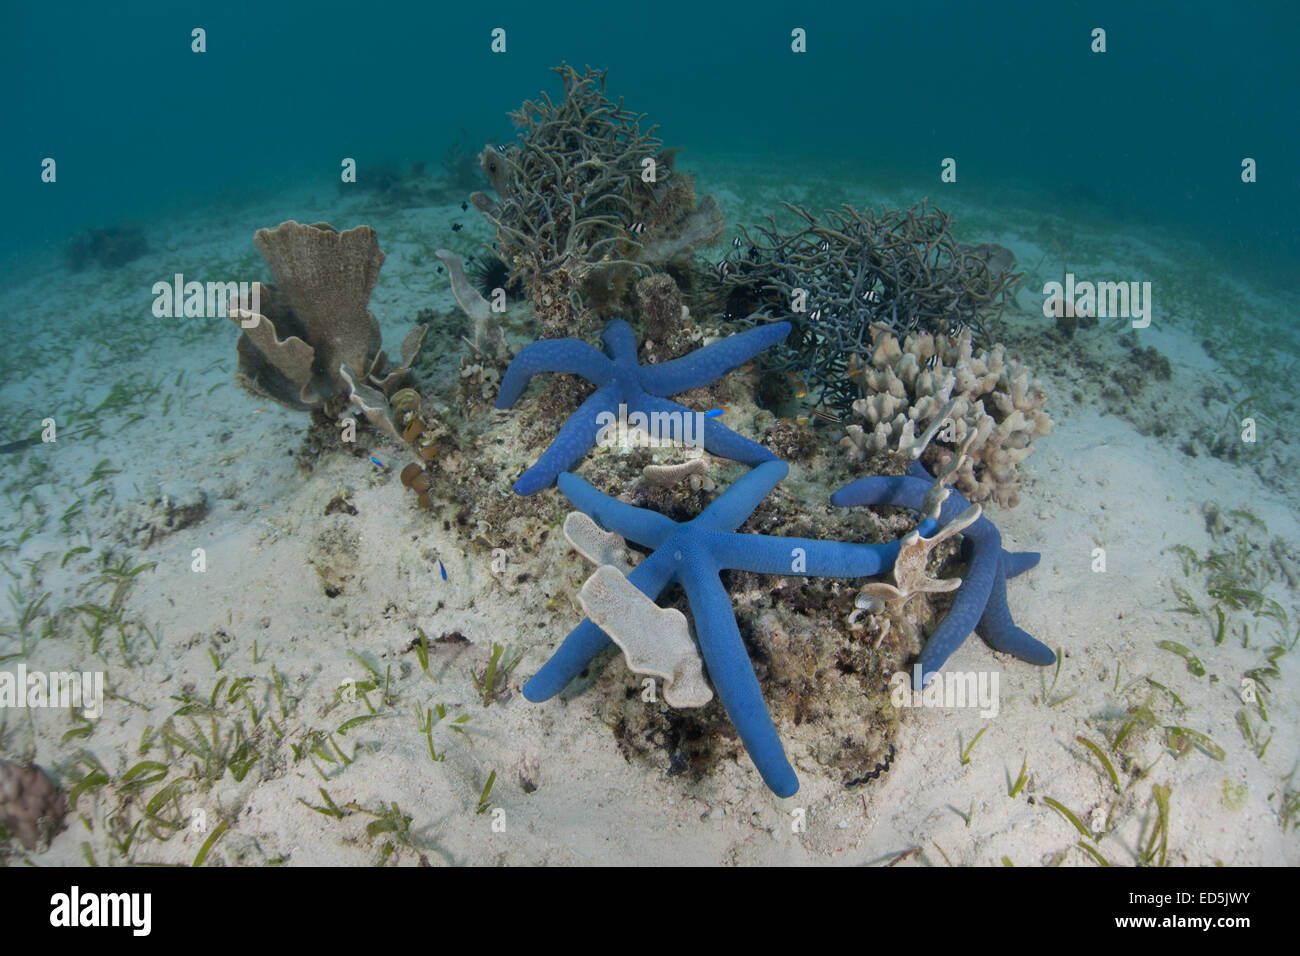 A trio of blue starfish (Linkia laevigata) cling to a small coral bommie growing near Alor, Indonesia. Stock Photo